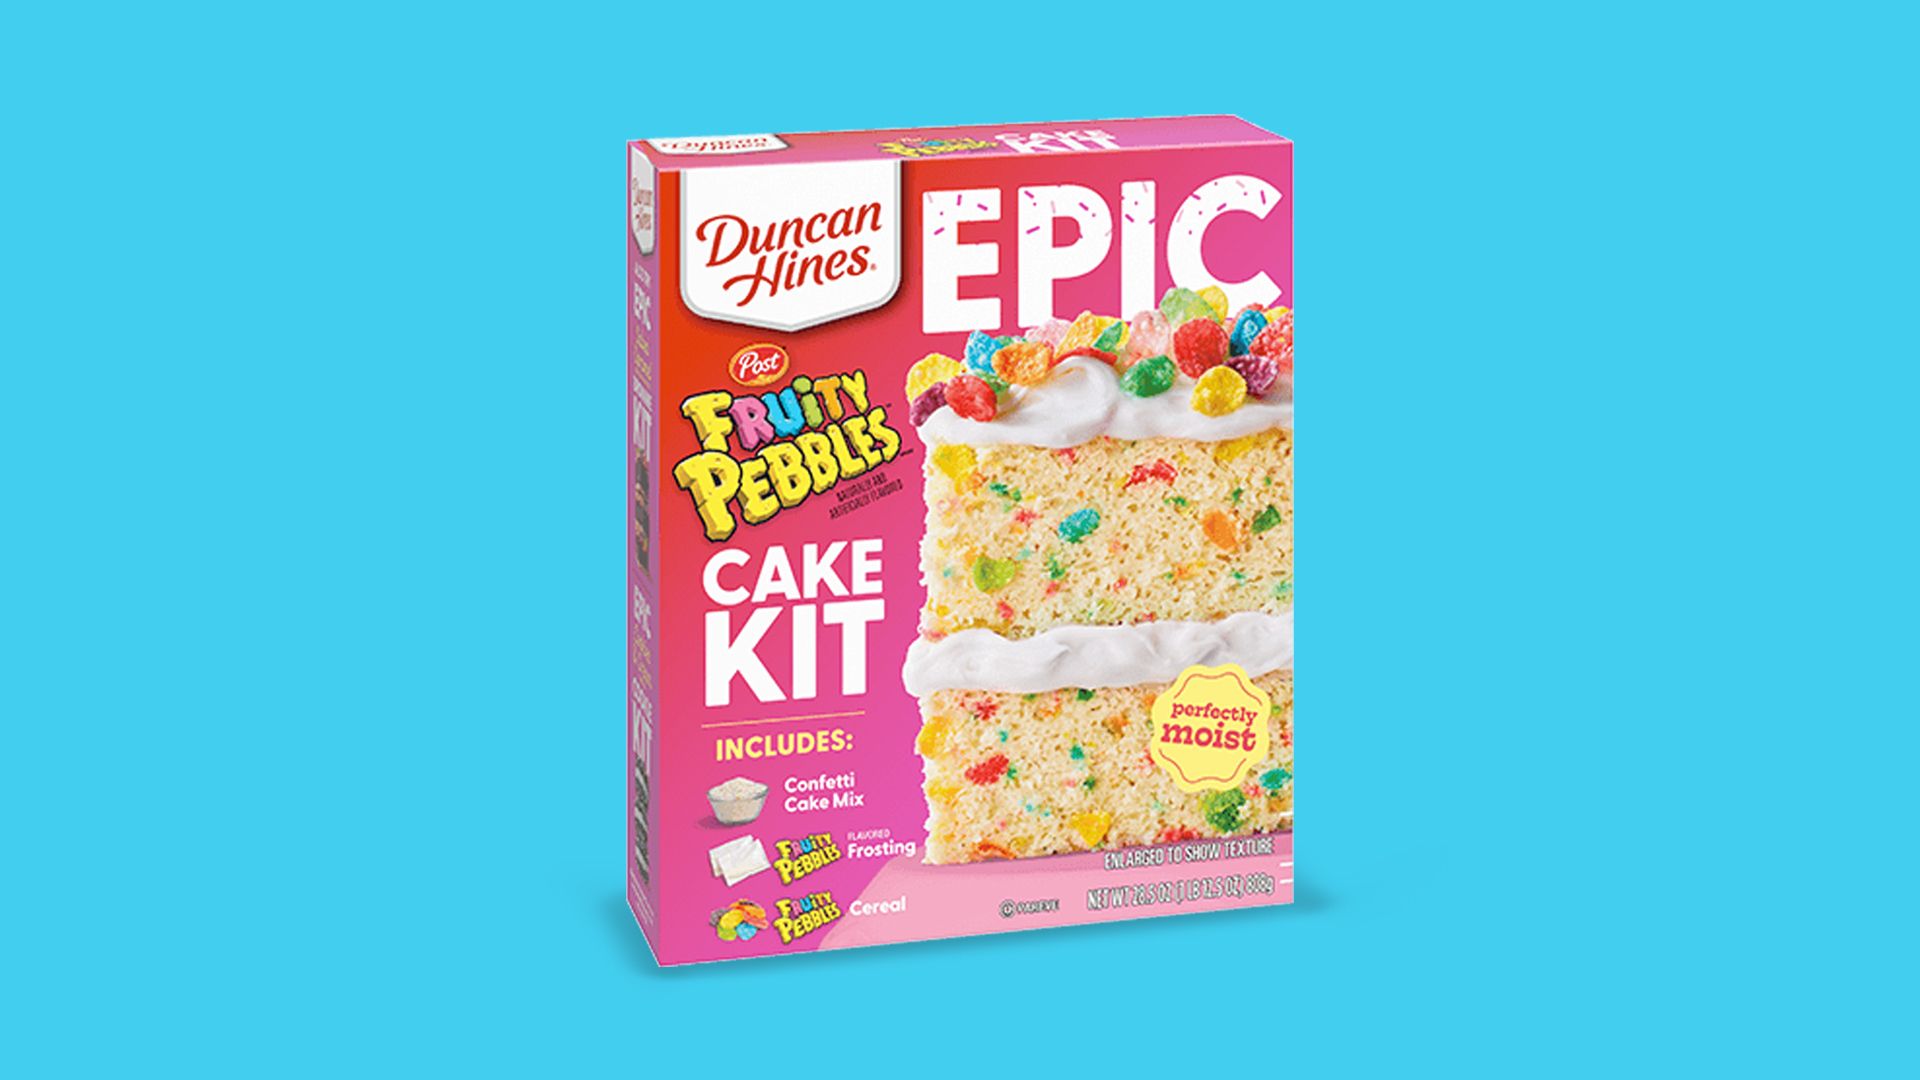 Picture of a Duncan Hines cake mix that features Fruity Pebbles and confetti cake.